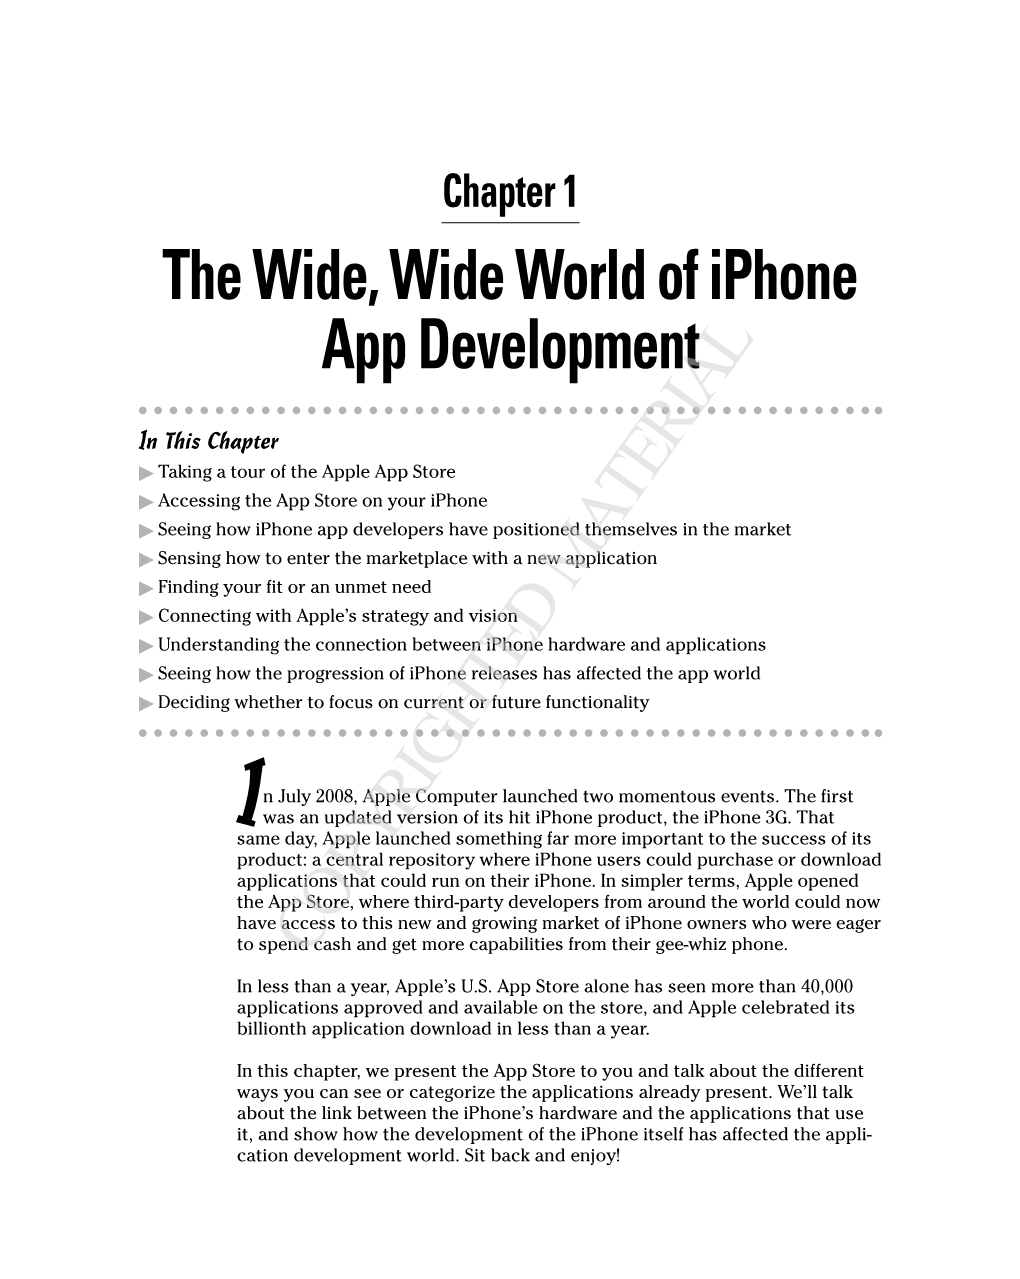 The Wide, Wide World of Iphone App Development